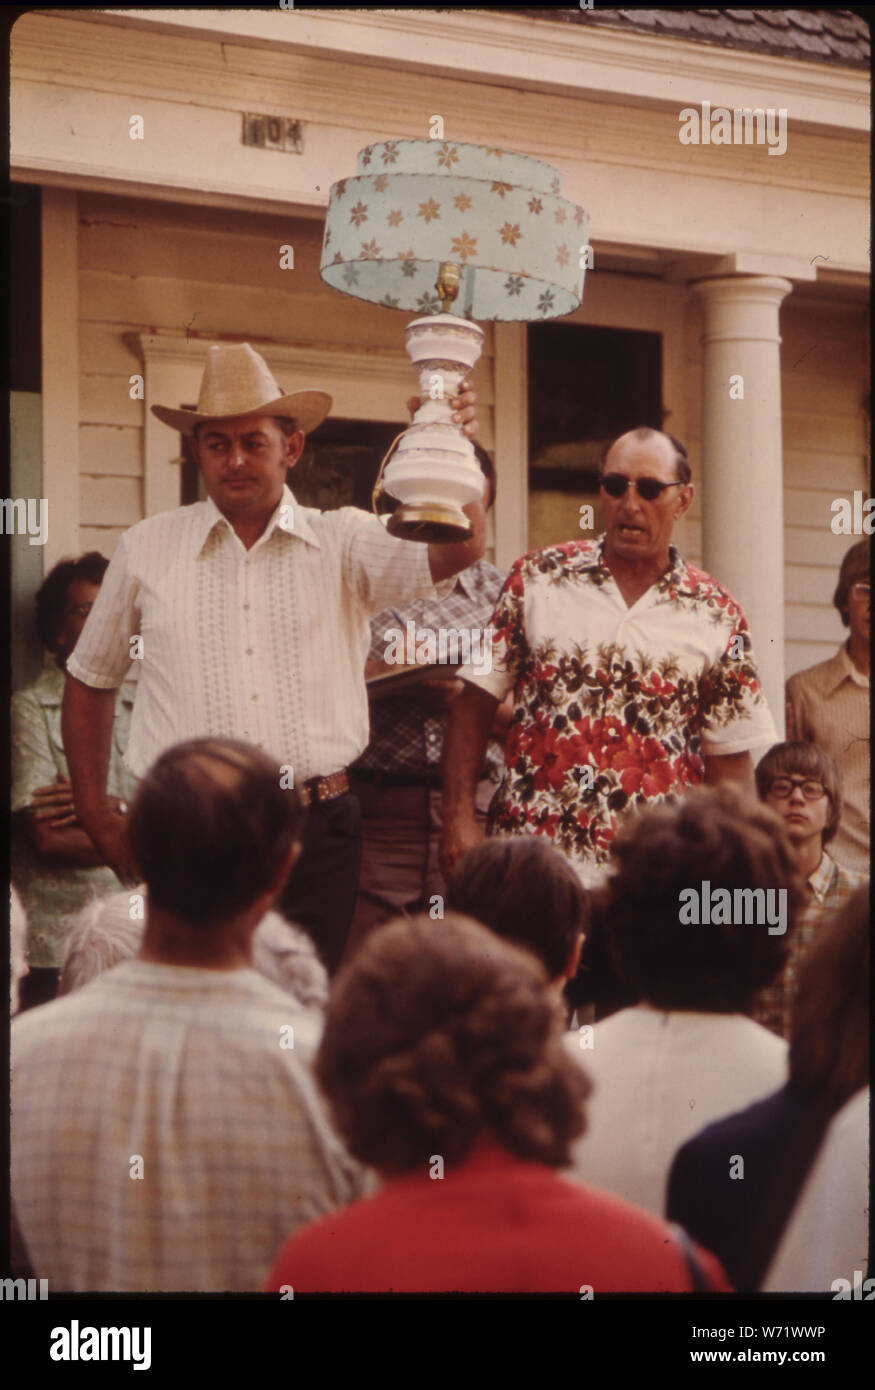 AN AUCTIONEER'S HELPER HOLDS A LAMP UP AS THE AUCTIONEER ASKS FOR BIDDING ON IT AT AN AUCTION IN NEW ULM, MINNESOTA. THEY USUALLY ARE HELD IN THE SUMMER MONTHS TO SELL HOUSEHOLD POSSESSIONS OF PEOPLE WHO ARE MOVING TO APARTMENTS, OR WHO HAVE DIED. NEW ULM IS A COUNTY SEAT TRADING CENTER OF 13,000 IN A FARMING AREA OF SOUTH CENTRAL MINNESOTA. IT WAS FOUNDED IN 1854 BY A GERMAN IMMIGRANT LAND COMPANY THAT ENCOURAGED ITS KINSMEN TO EMIGRATE FROM EUROPE Stock Photo